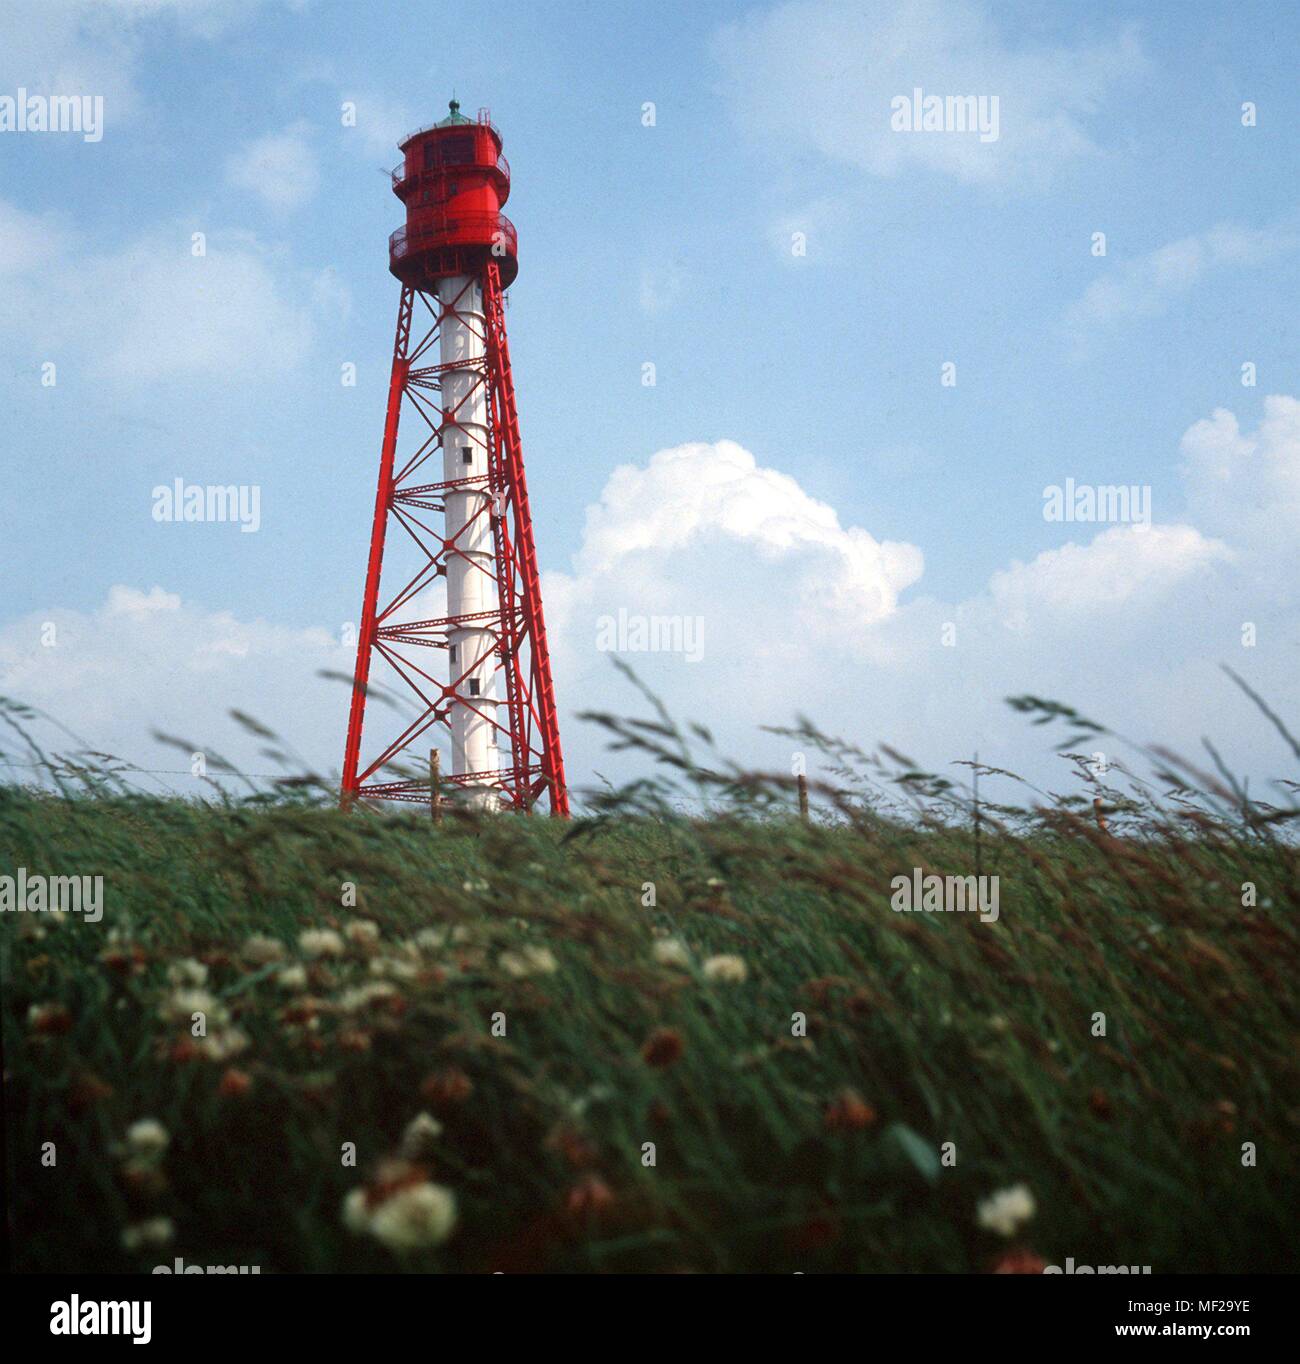 Camp, Deutschland. 30th Nov, 2002. The highest lighthouse on the German coast near Campen in the district of Aurich was built between 1889 and 1892 and has a height of 65 meters. (Undated) | usage worldwide Credit: dpa/Alamy Live News Stock Photo